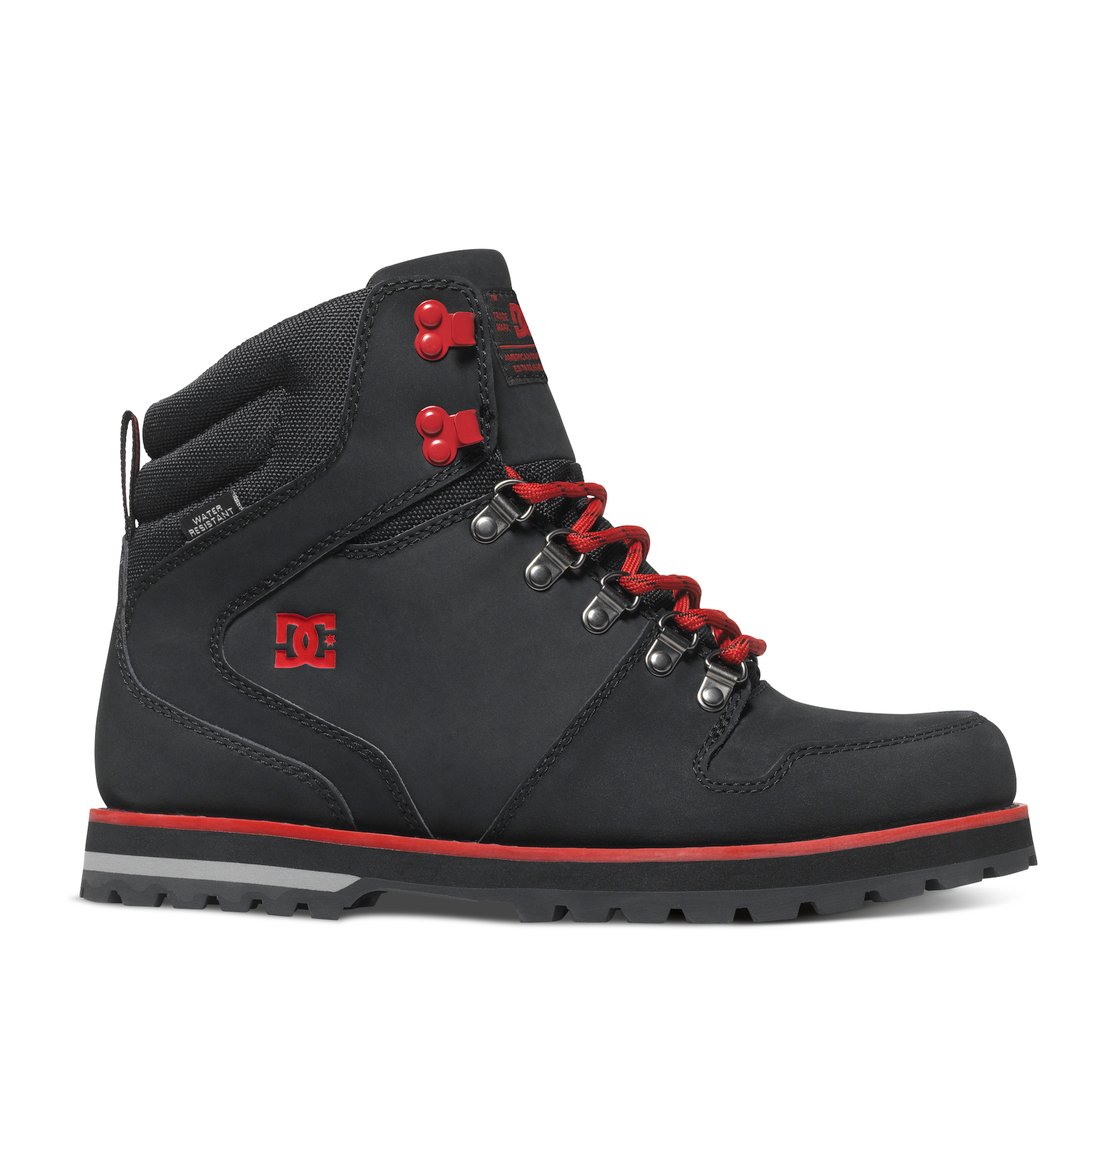 76 Sports Dc shoes winter shoes Combine with Best Outfit